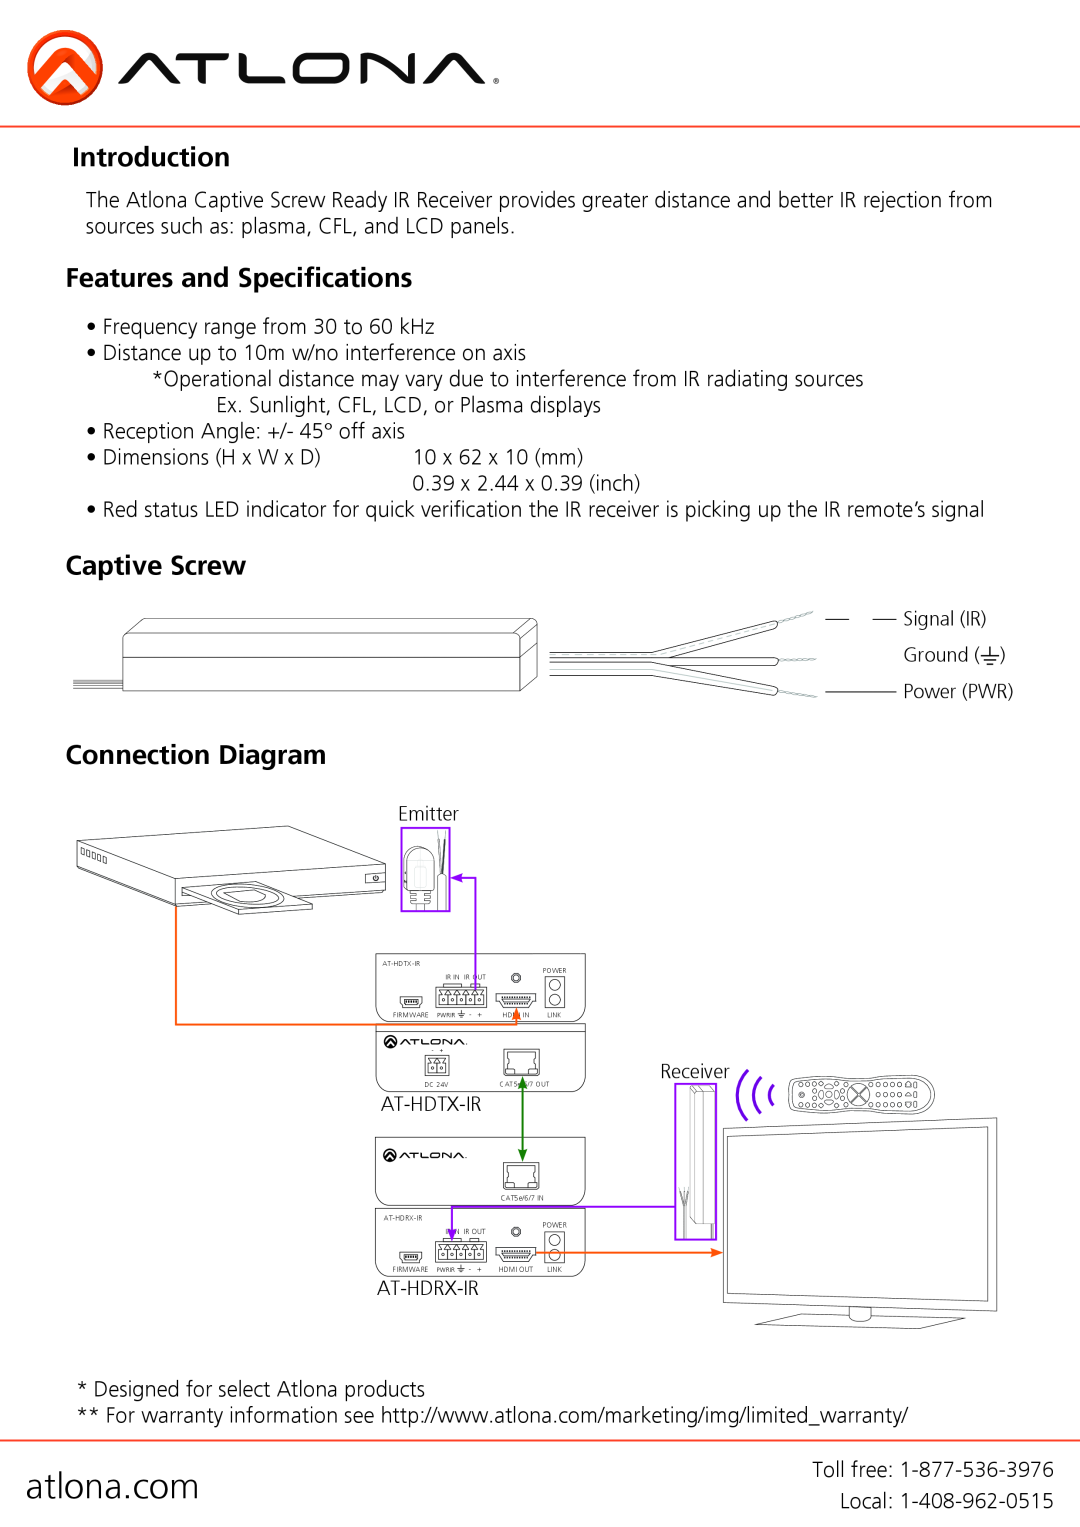 Atlona AT-IRX-CS manual atlona.com, Introduction, Features and Specifications, Captive Screw, Connection Diagram 